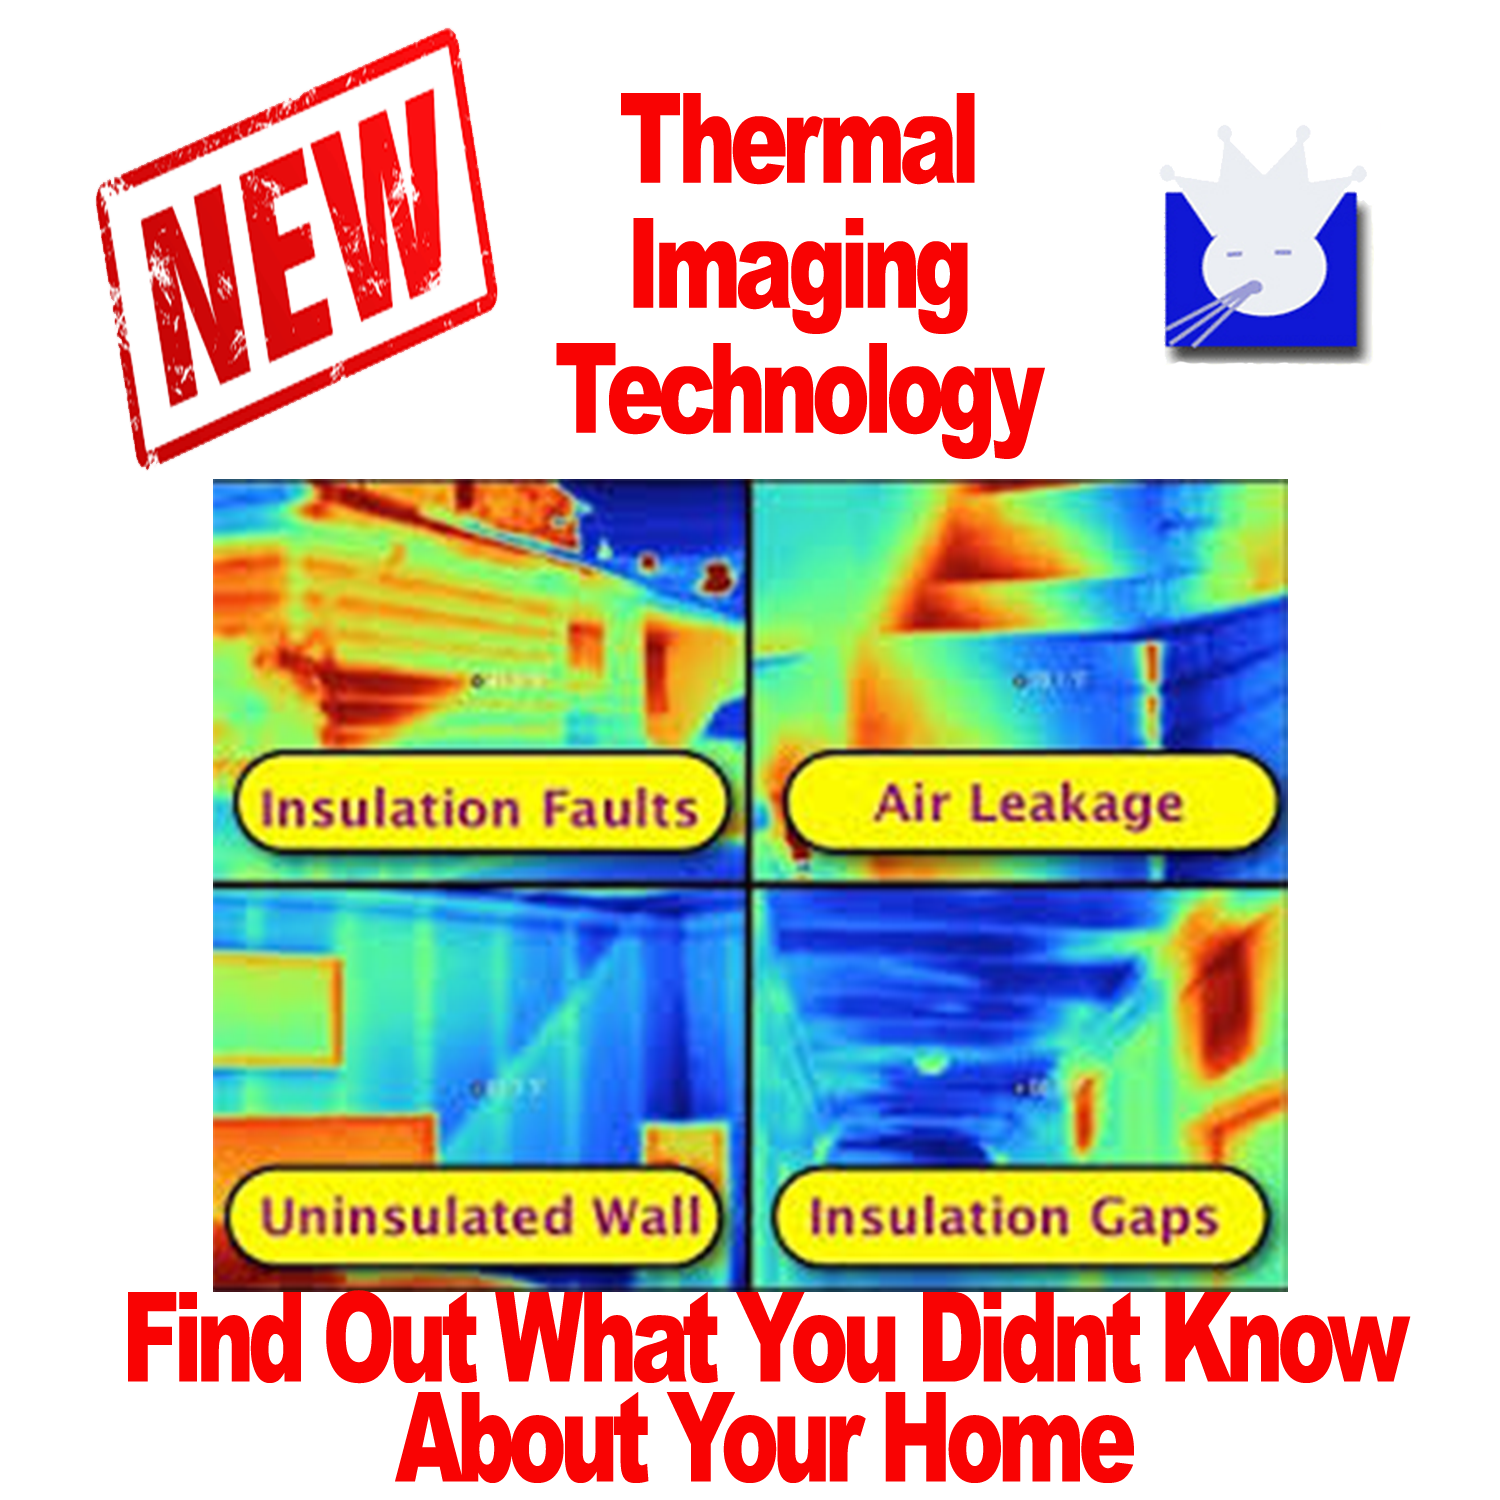 AAA Duct Cleaning offers Thermal imaging services for new home buyers San Antonio. Thermal imaging can help reveal air leaks and insulation problems San Antonio. San Antonio Thermal Imaging Company.